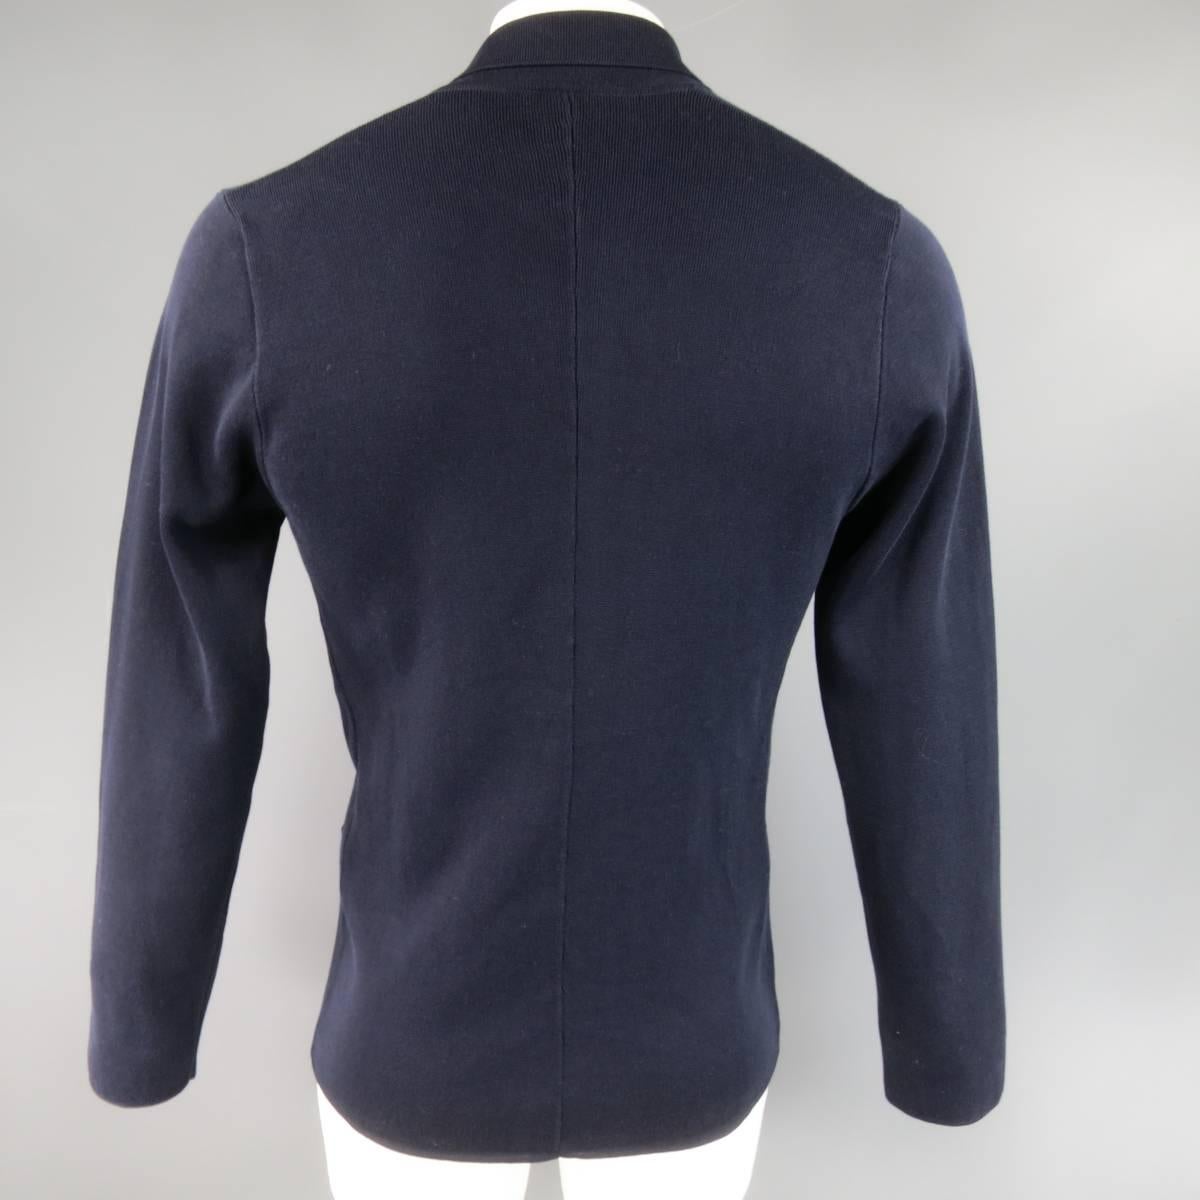 mens double breasted cardigans